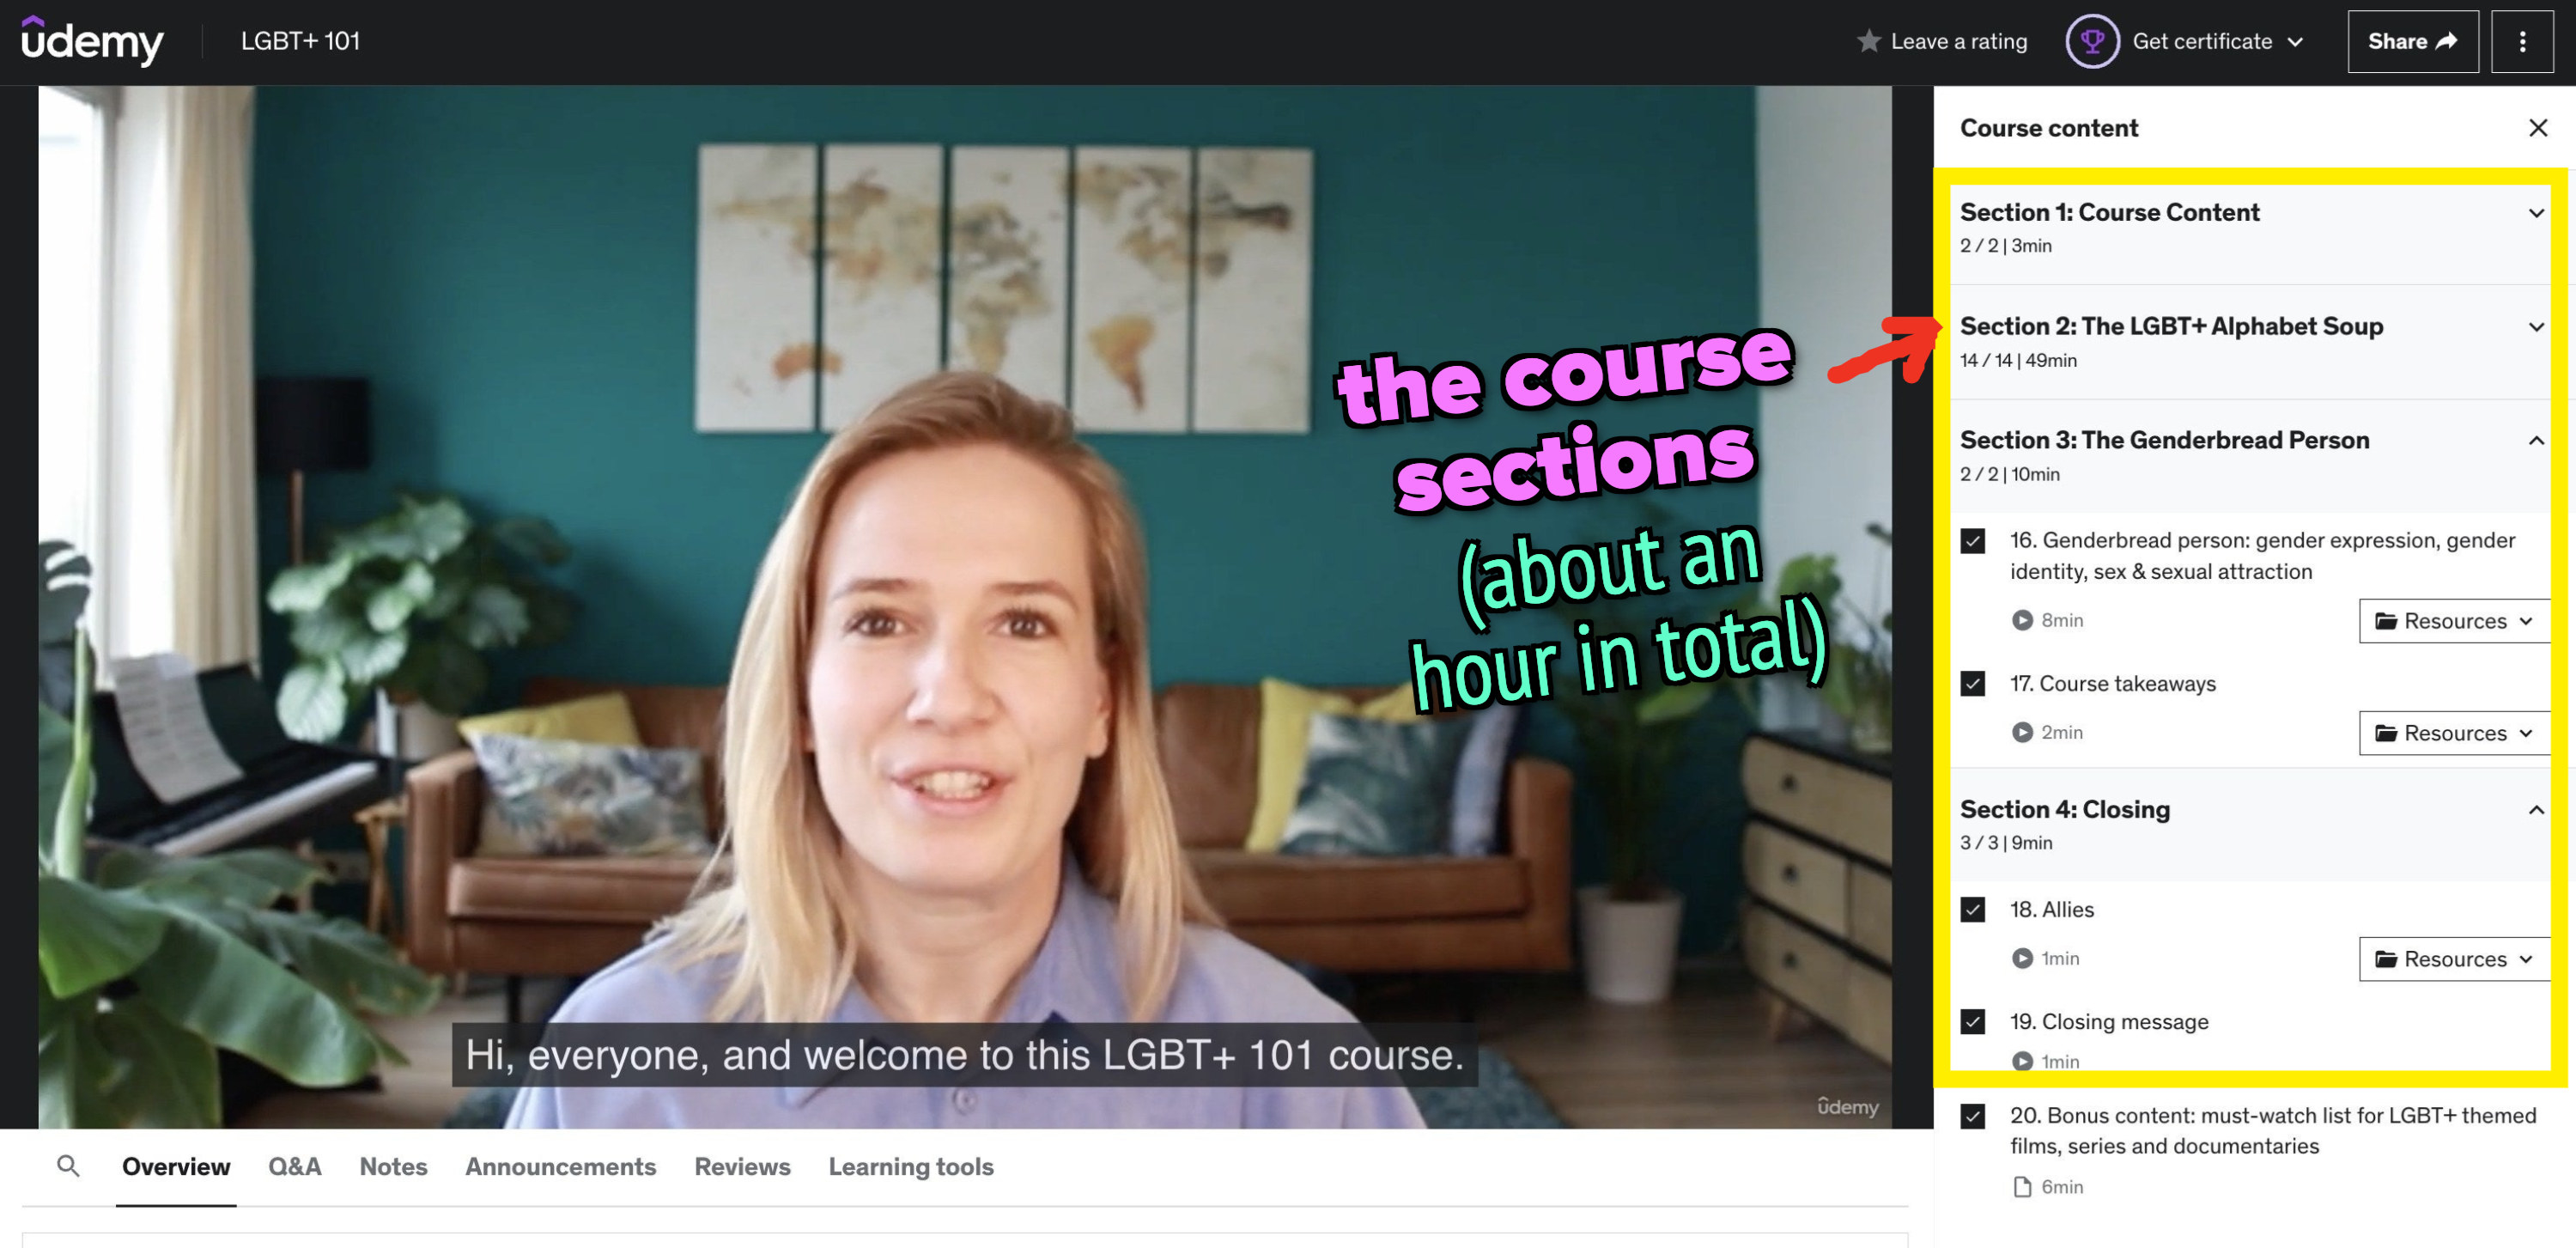 instructor introducing her udemy lgbt+ 101 course